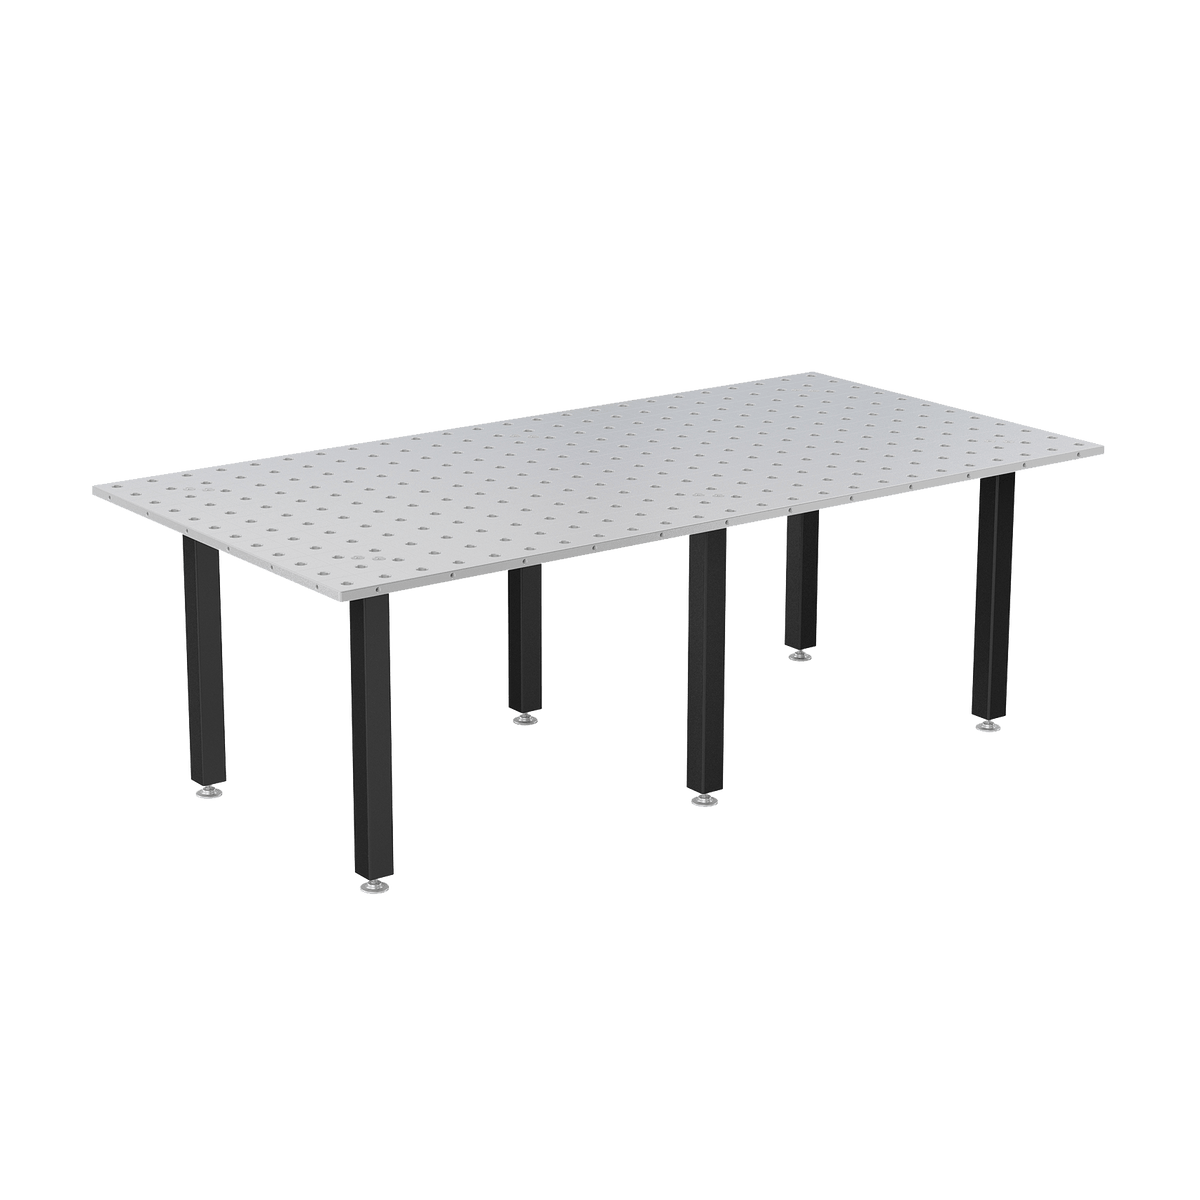 System 28 2400x1200mm (94"x47") Siegmund "BASIC" Welding Table (Item No. 4-281030) - Siegmund Welding Tables and Fixtures USA - A Division of Quantum Machinery Group